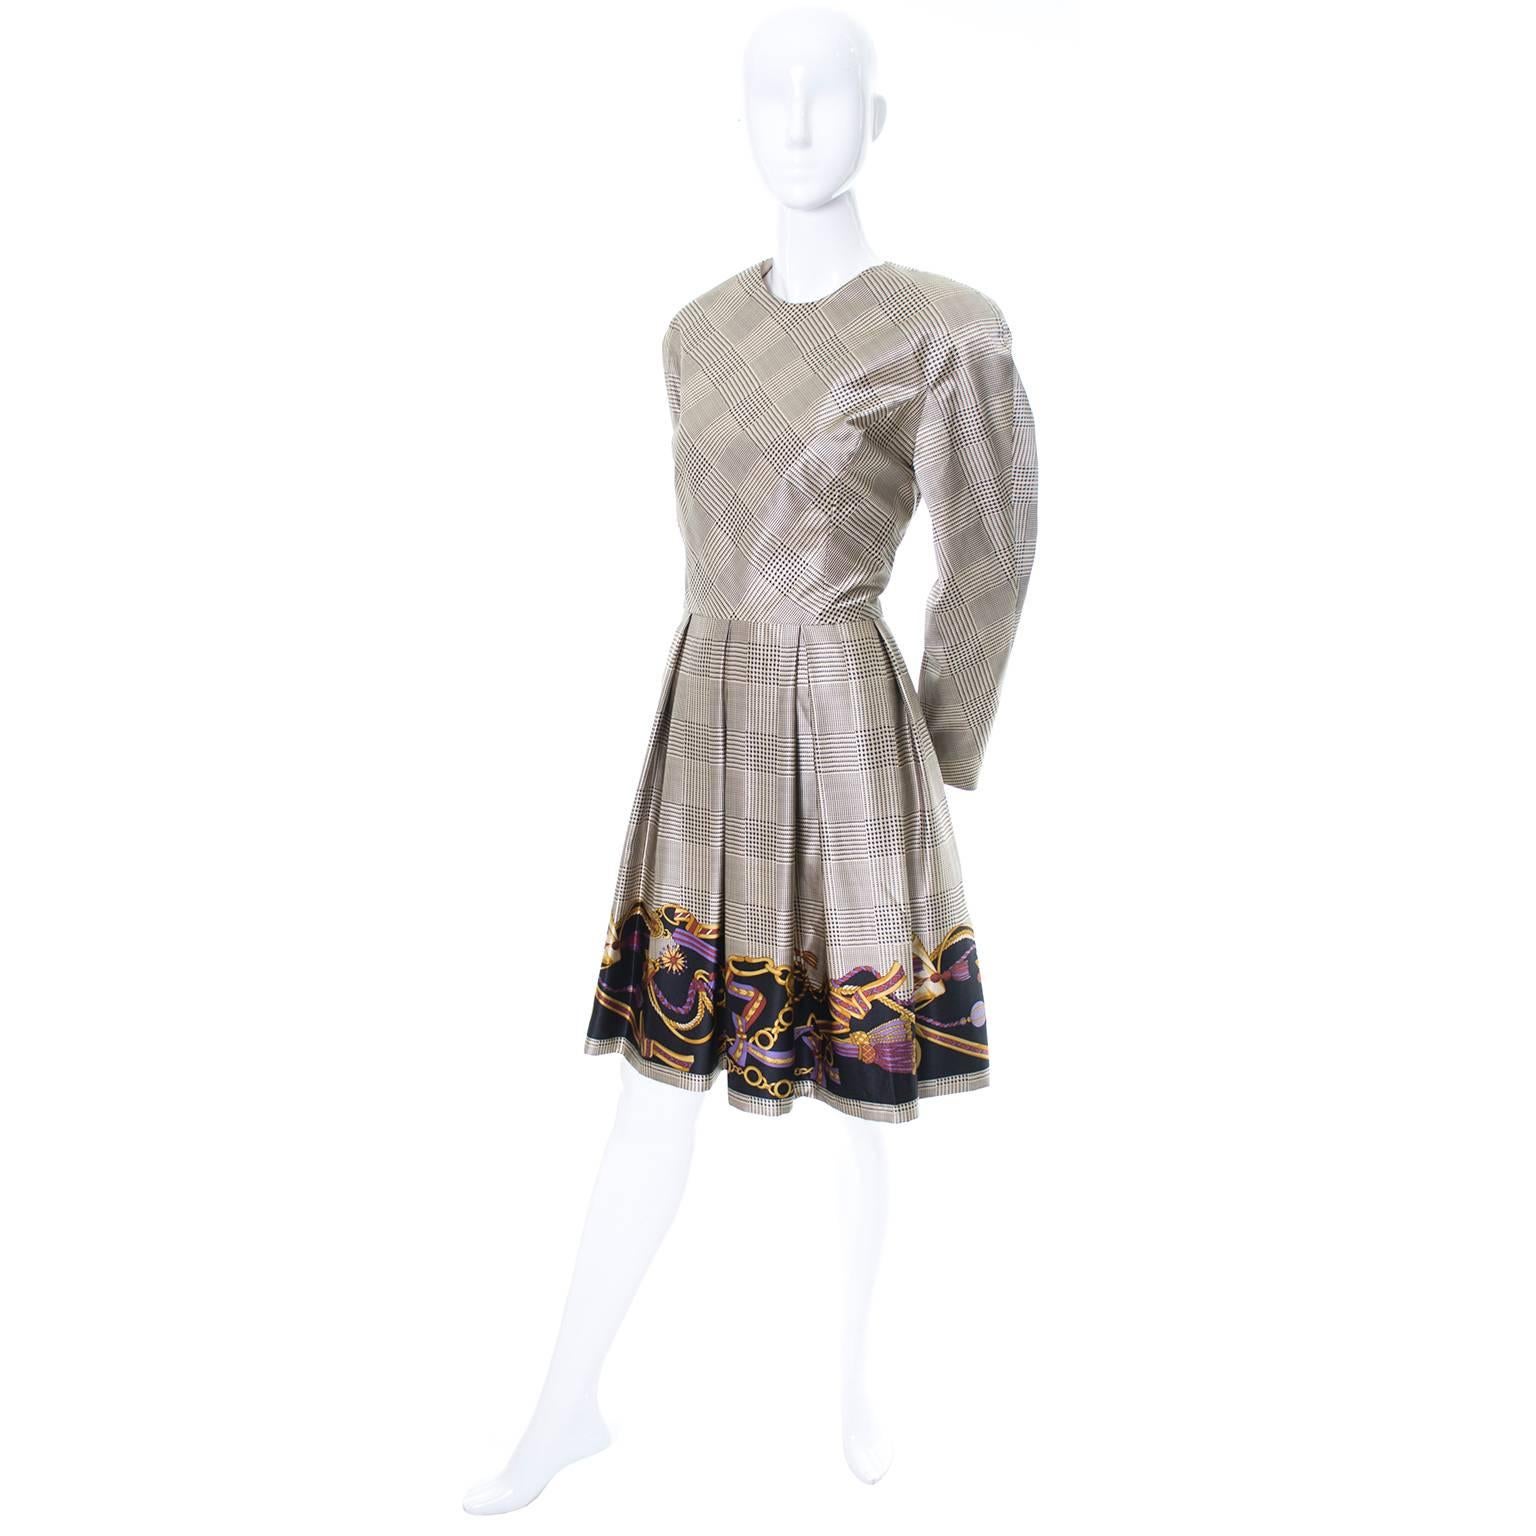 This pretty silk vintage dress was designed by Bill Travilla, the designer who was one of Marilyn Monroe's favorites! He designed the costumes for Gentlemen Prefer Blondes, How to Marry a Millionaire and The Seven Year Itch, among many others.  A